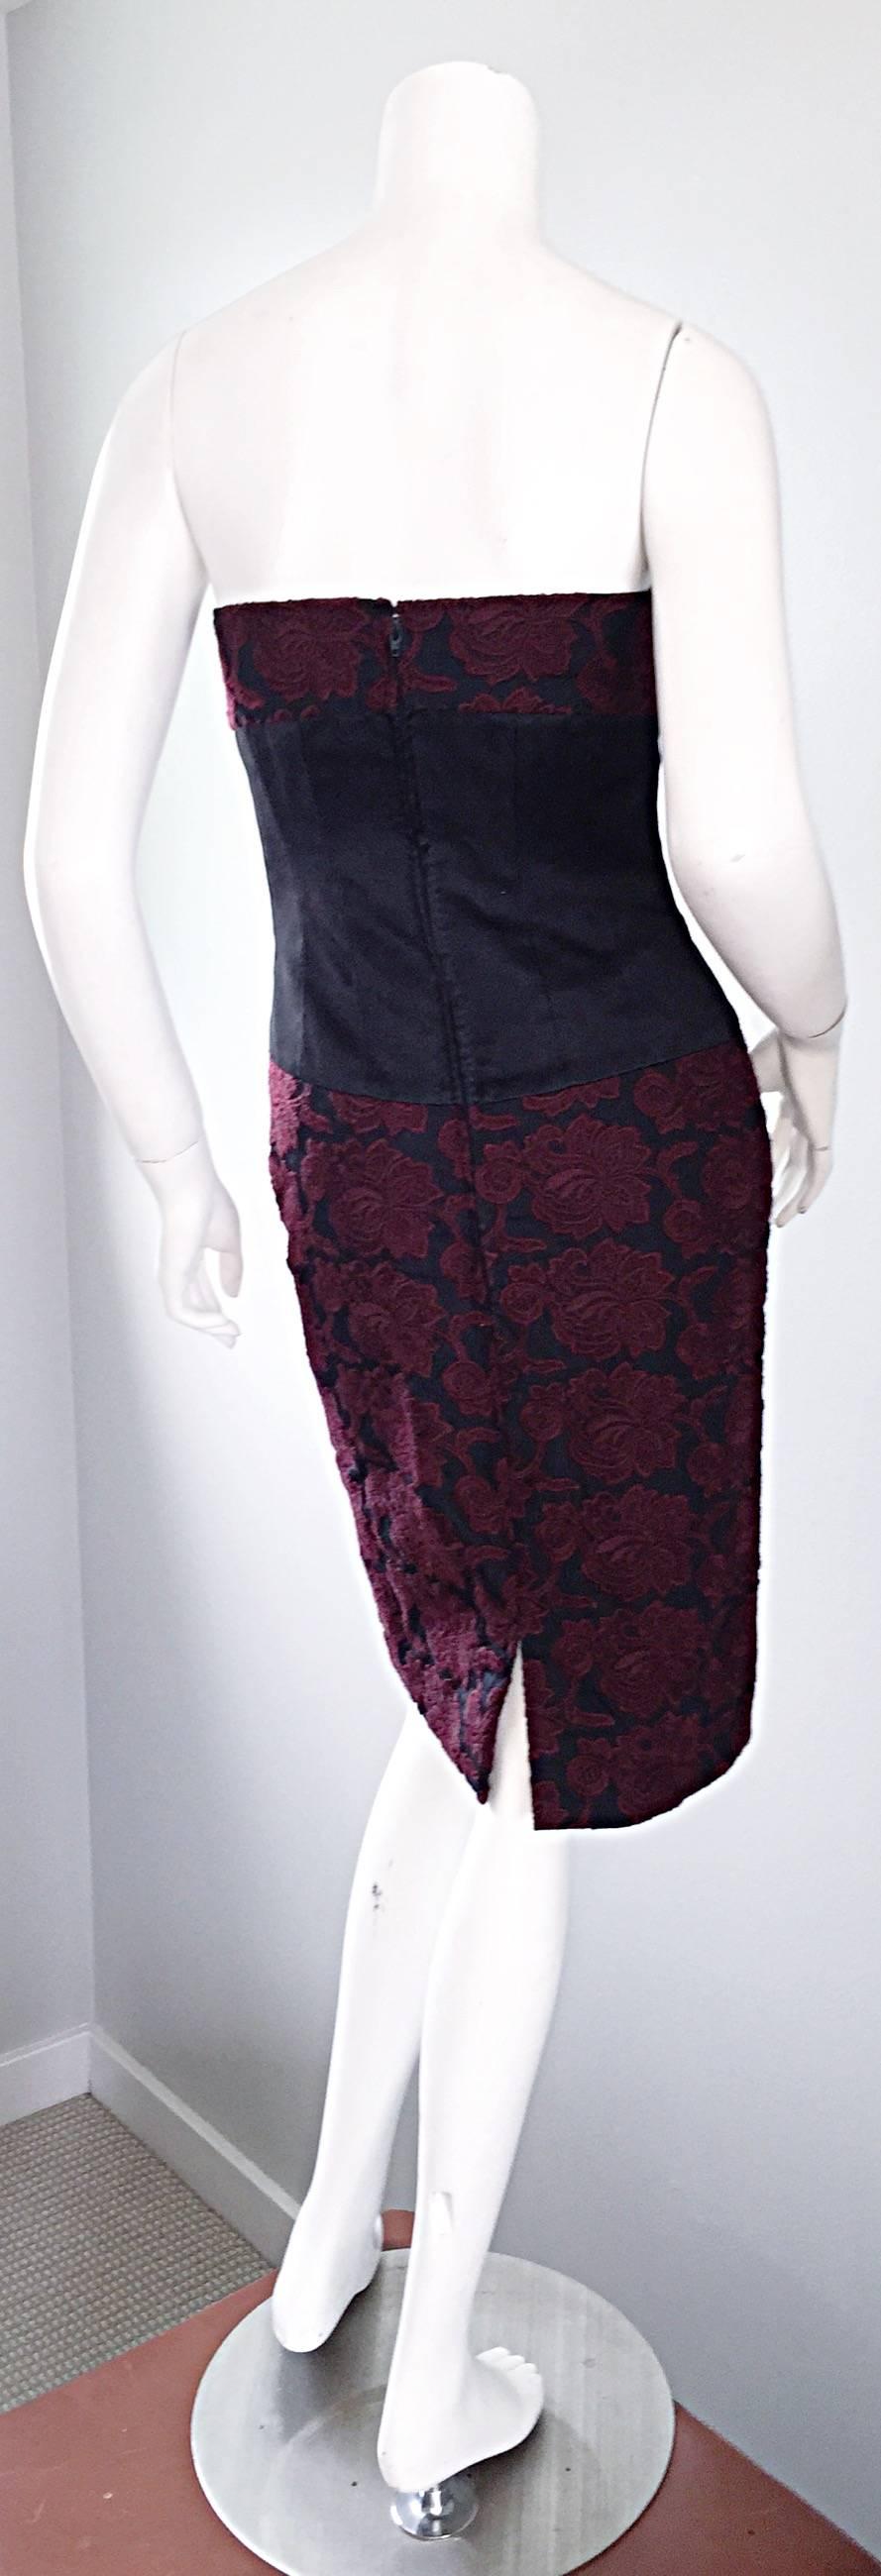 Vintage Paola Quadretti Couture 90s Black Burgundy Embroidered Strapless Dress For Sale 3